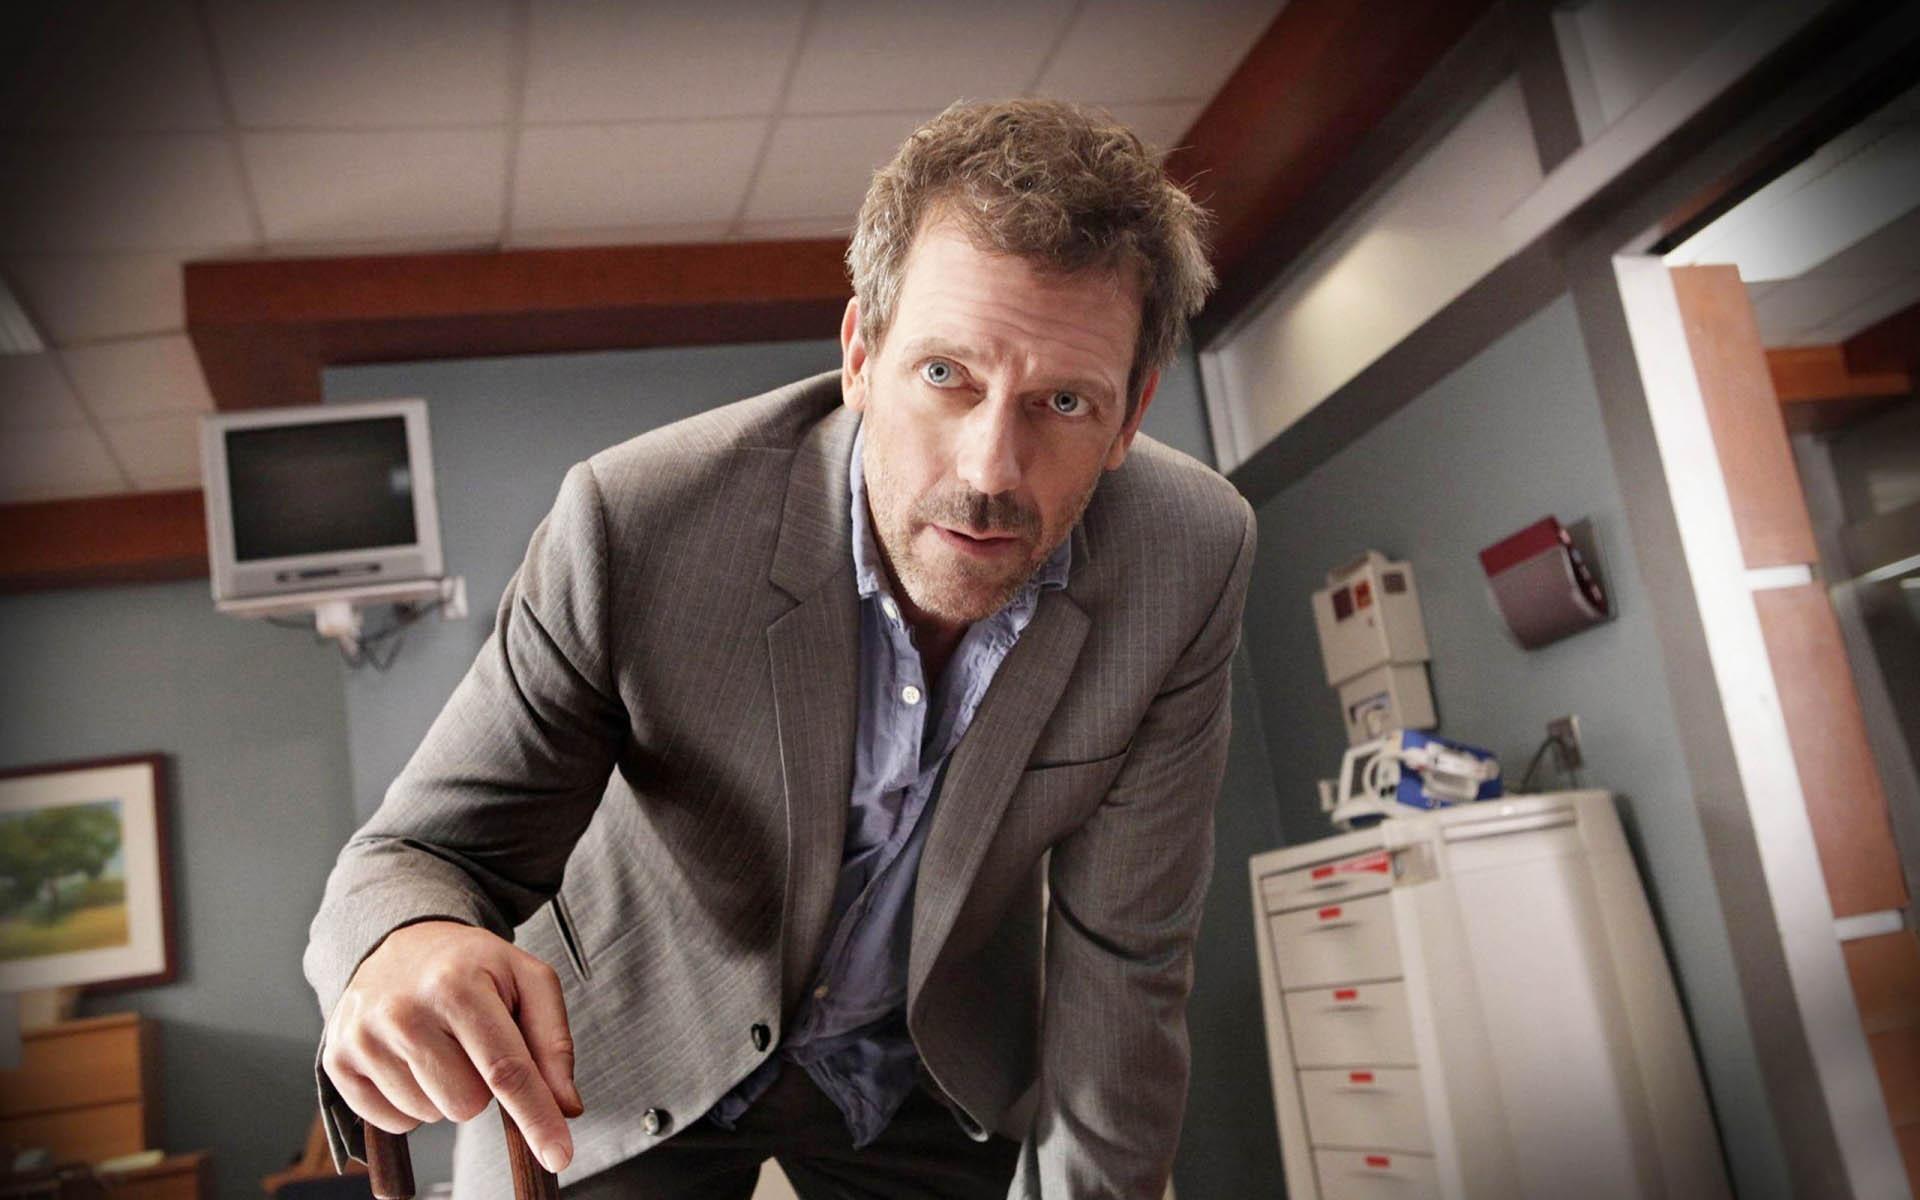 House MD Wallpaper 7